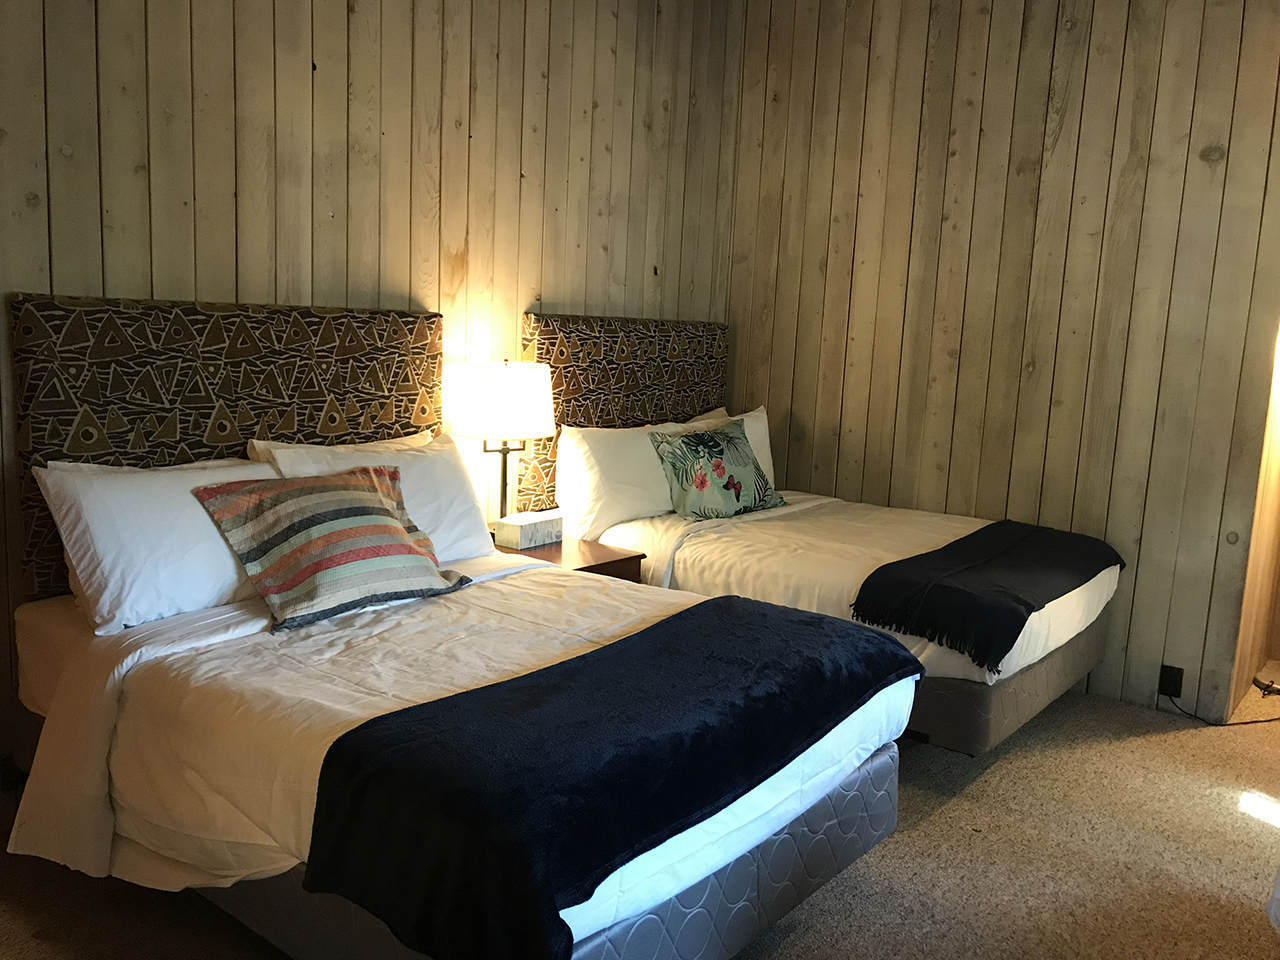 surf-lodge-2-double-room-6-001